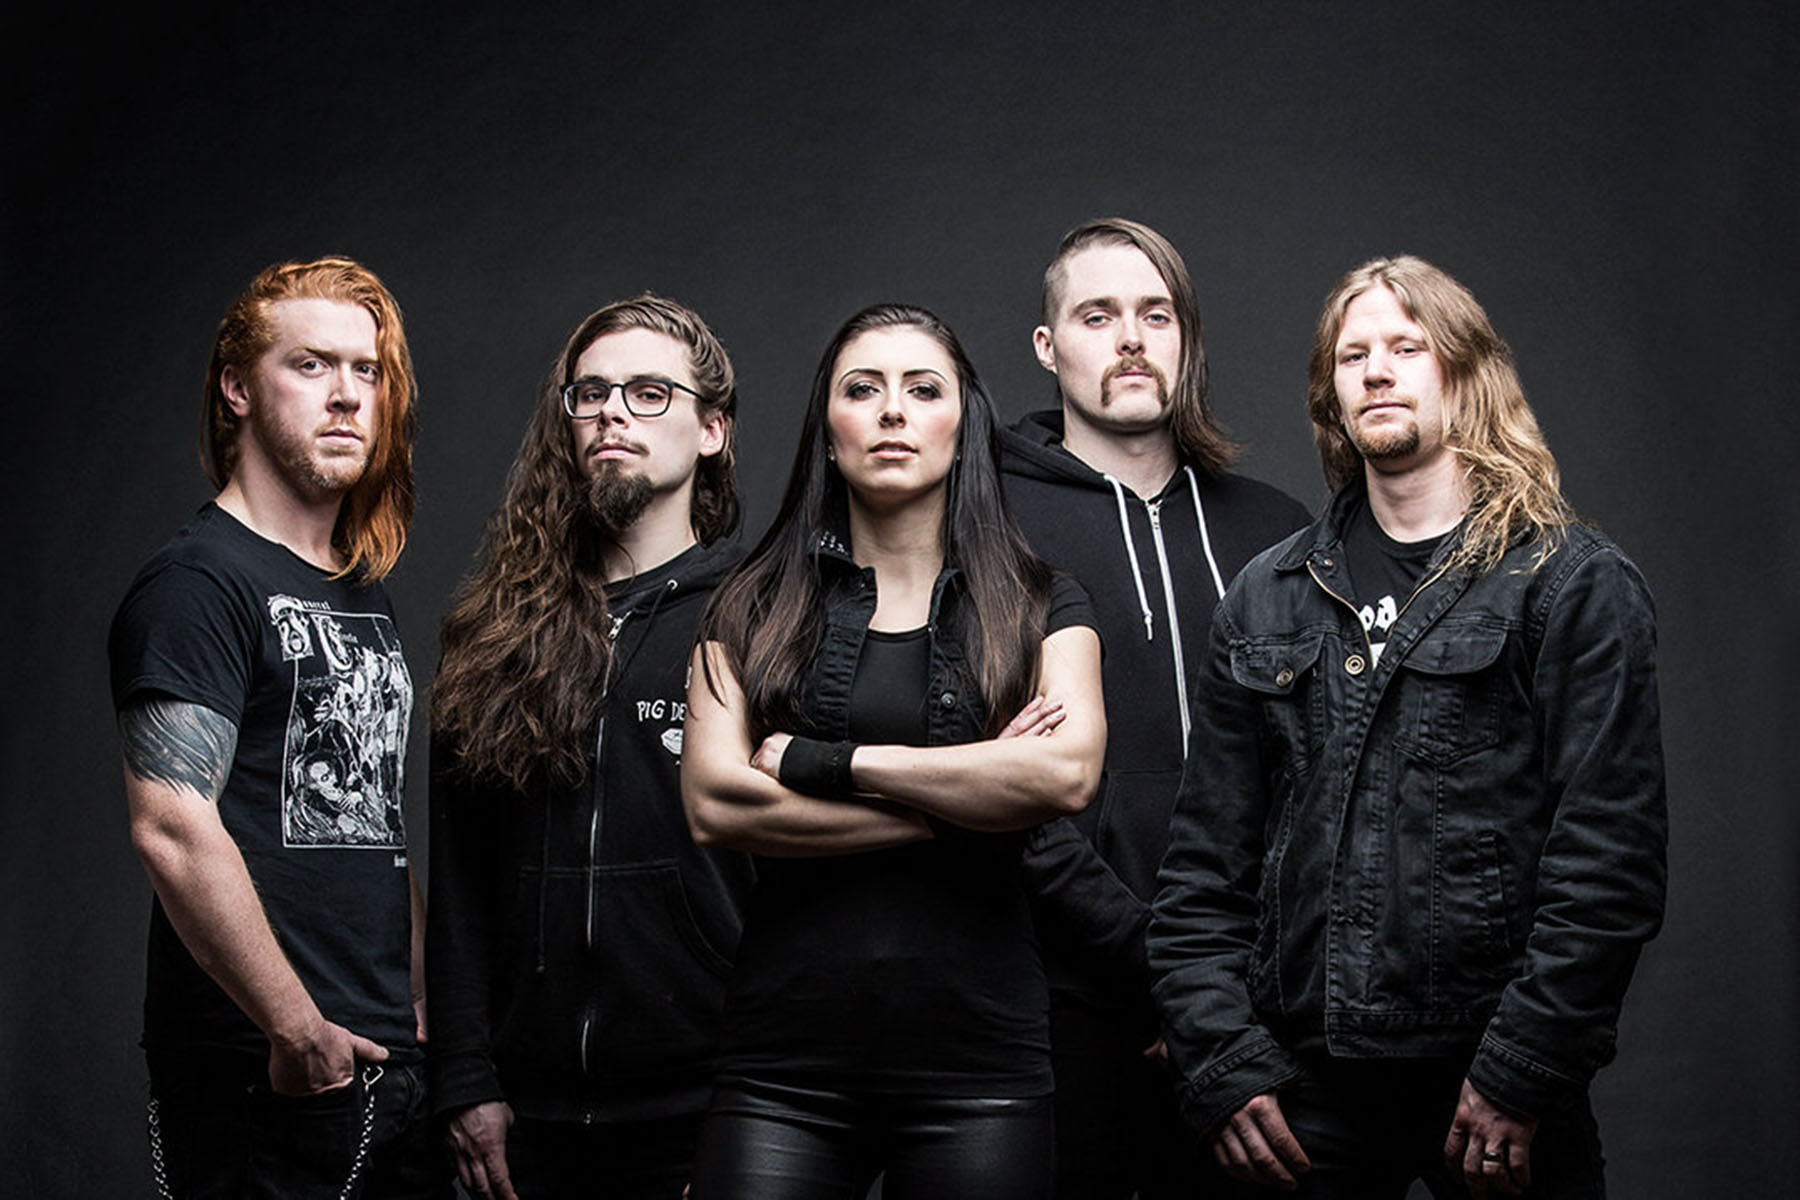 UNLEASH THE ARCHERS Announce North American Tour, with Support to Come